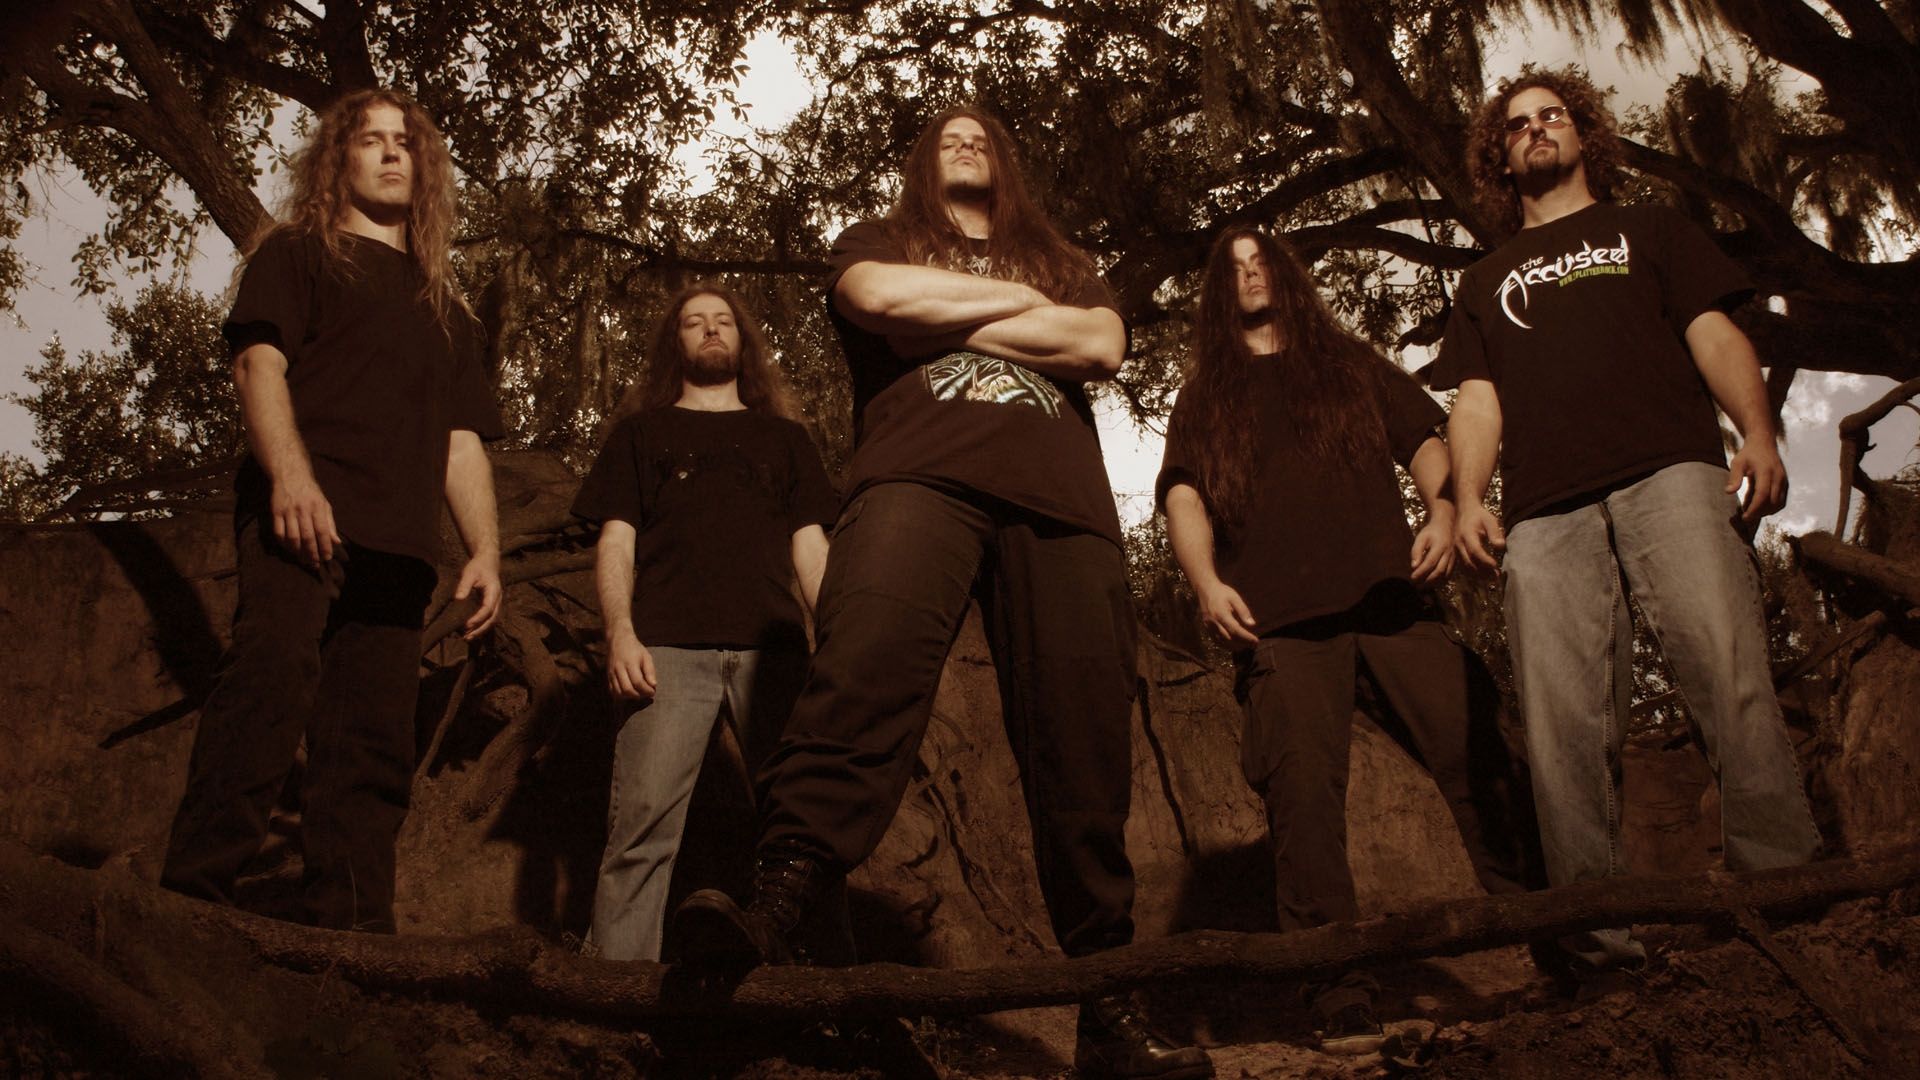 Download Wallpaper 1920x1080 Cannibal corpse, Trees, T-shirts, Sky ...